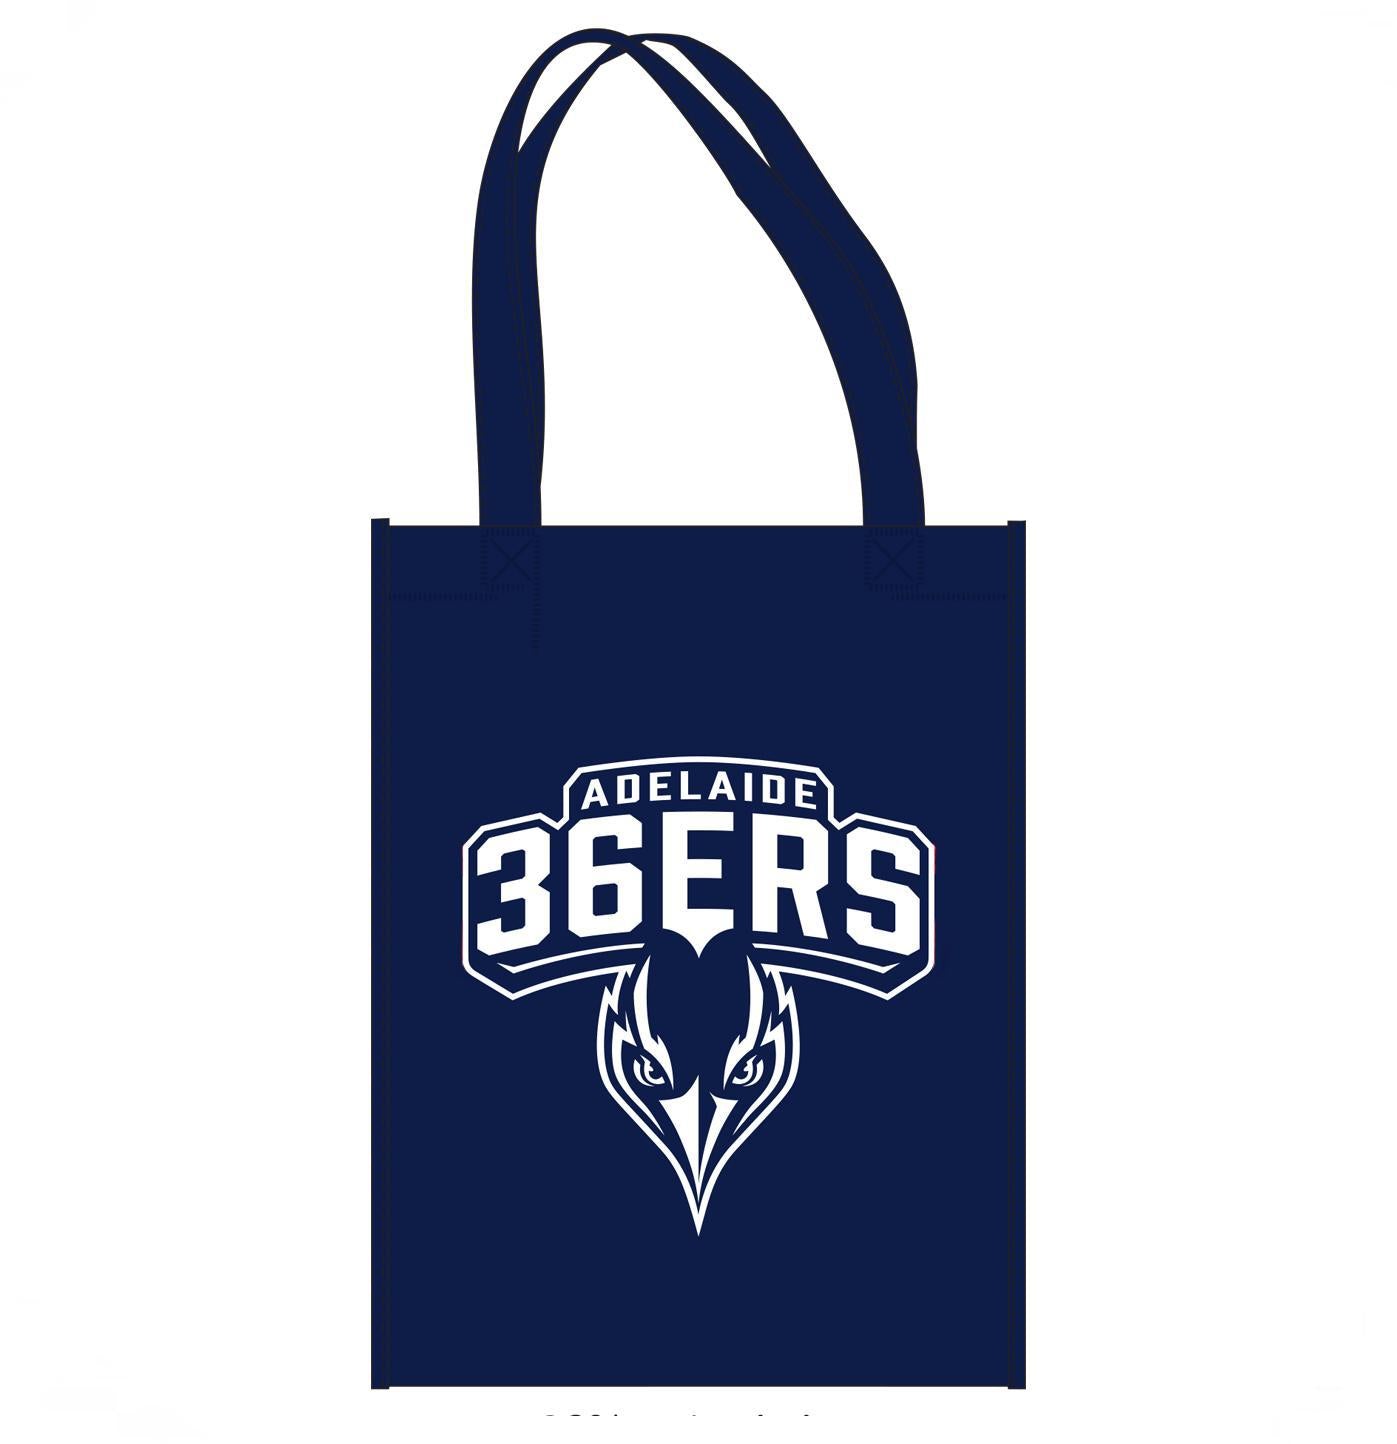 Large Tote Bag - Adelaide 36ers